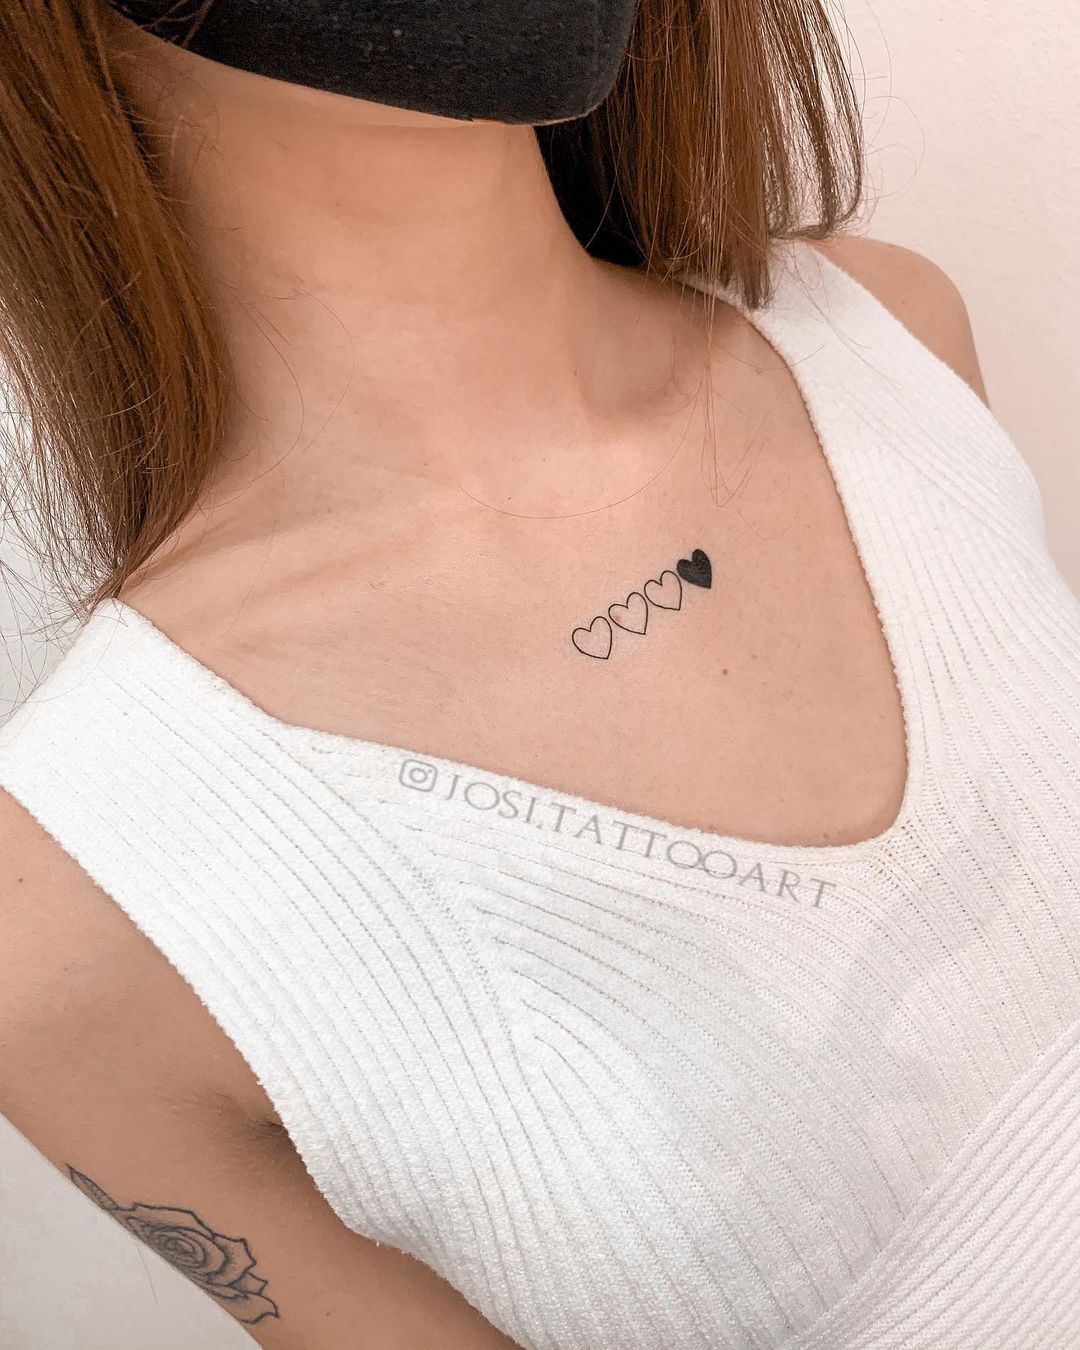 125 Chest Tattoos For Women To Take Your Breath Away